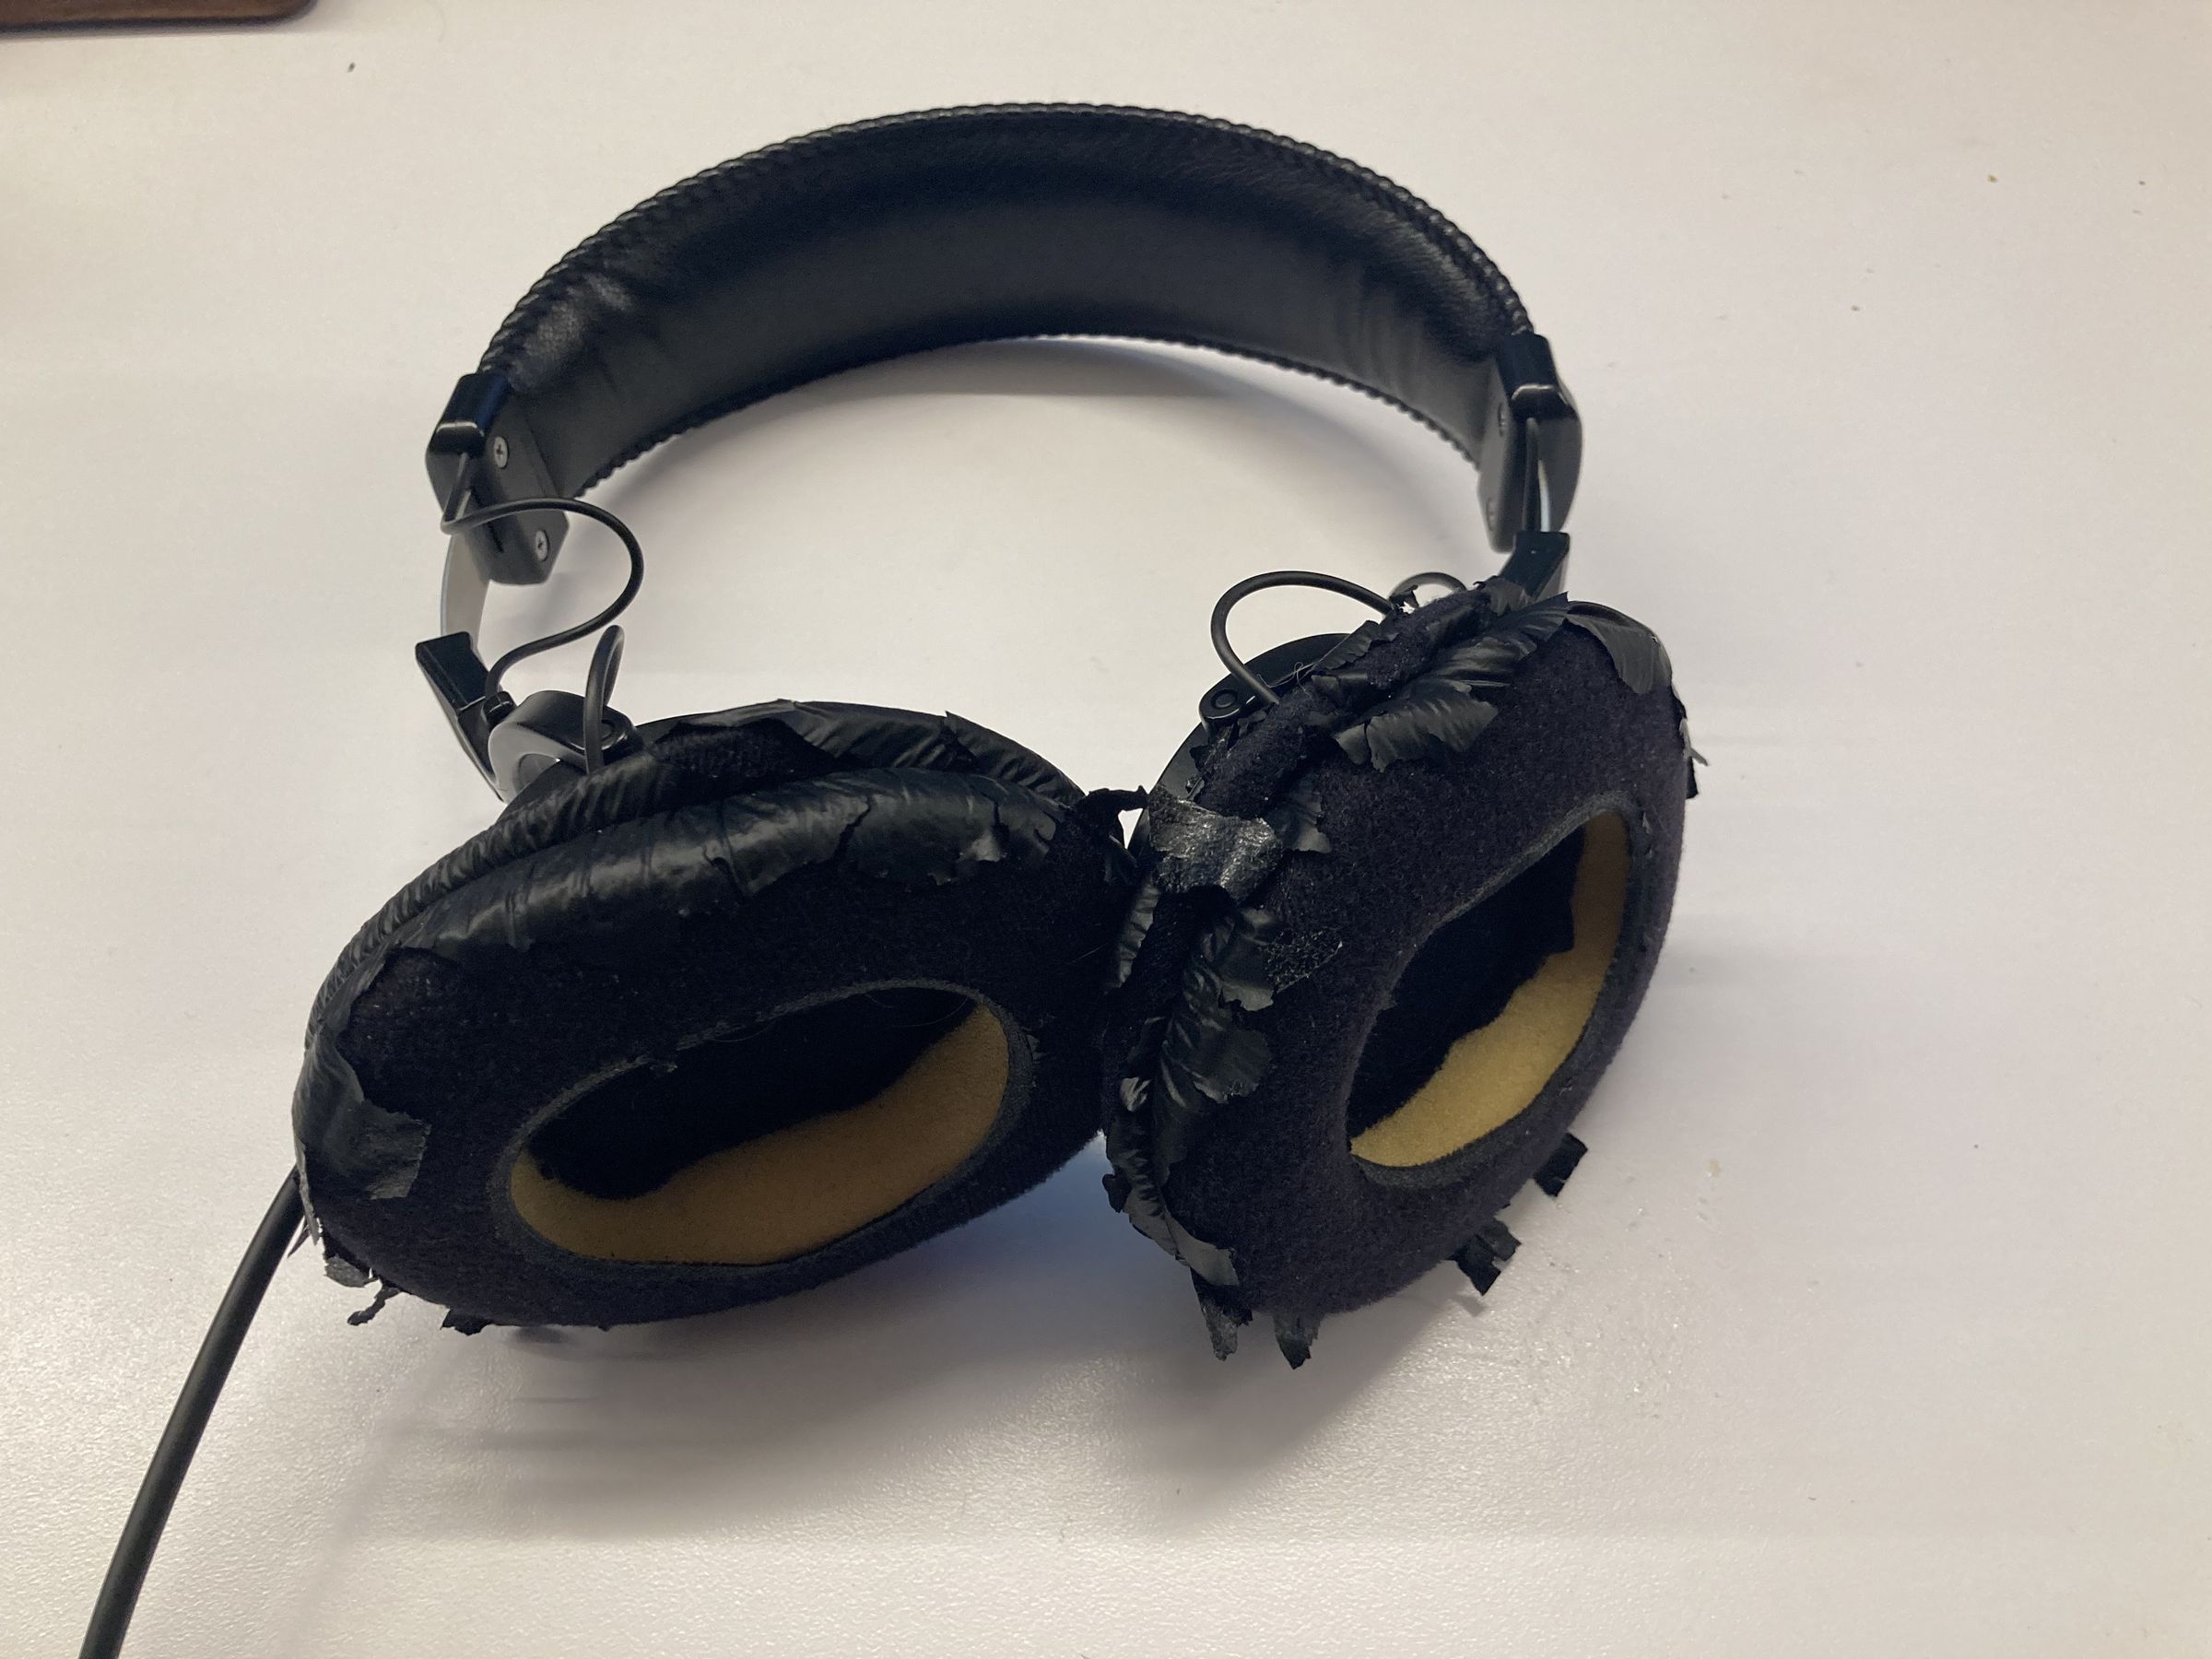 A pair of Sony MDR-7506 with badly degraded headphone pads.